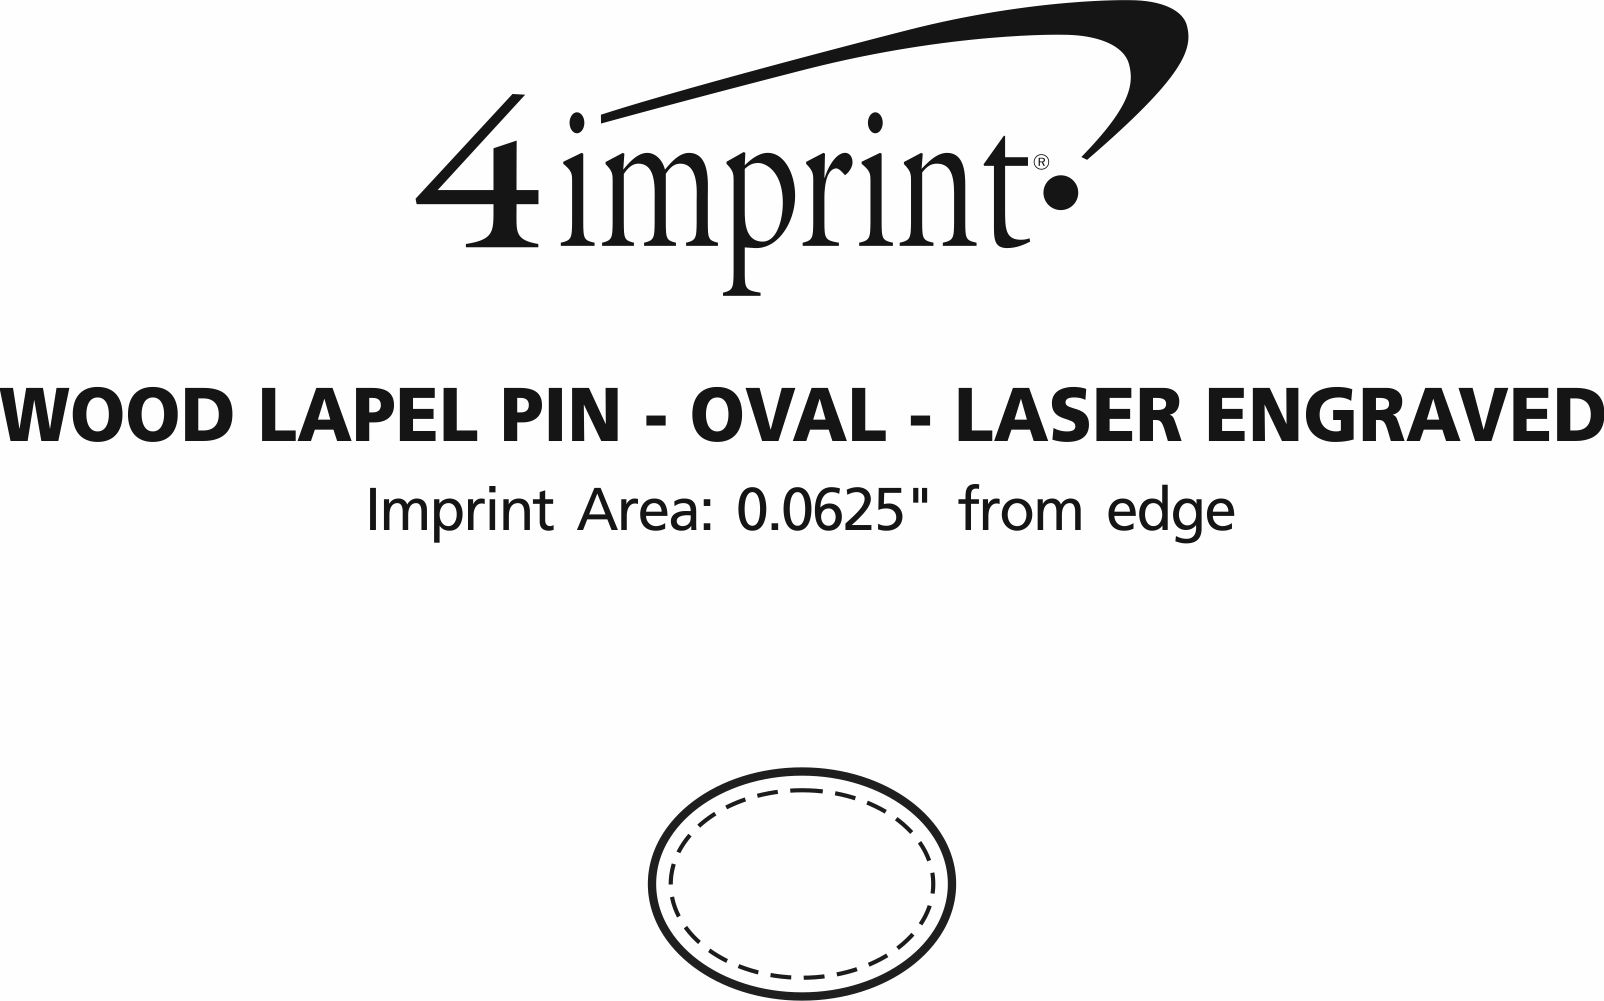 Imprint Area of Wood Lapel Pin - Oval - Laser Engraved